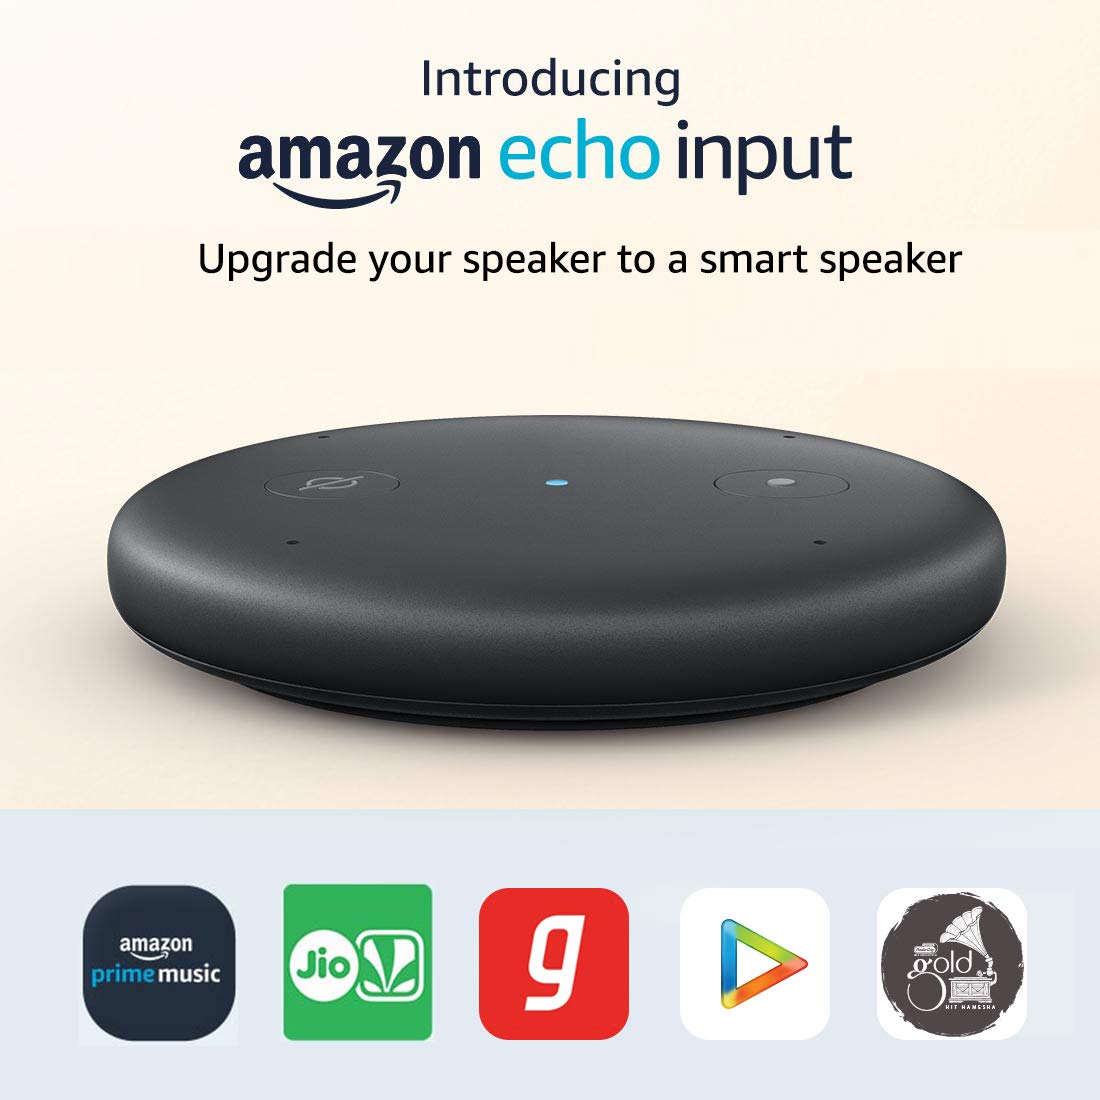 Echo Input Now Available To Buy On Amazon India - Make Your Ordinary Speakers Smart.